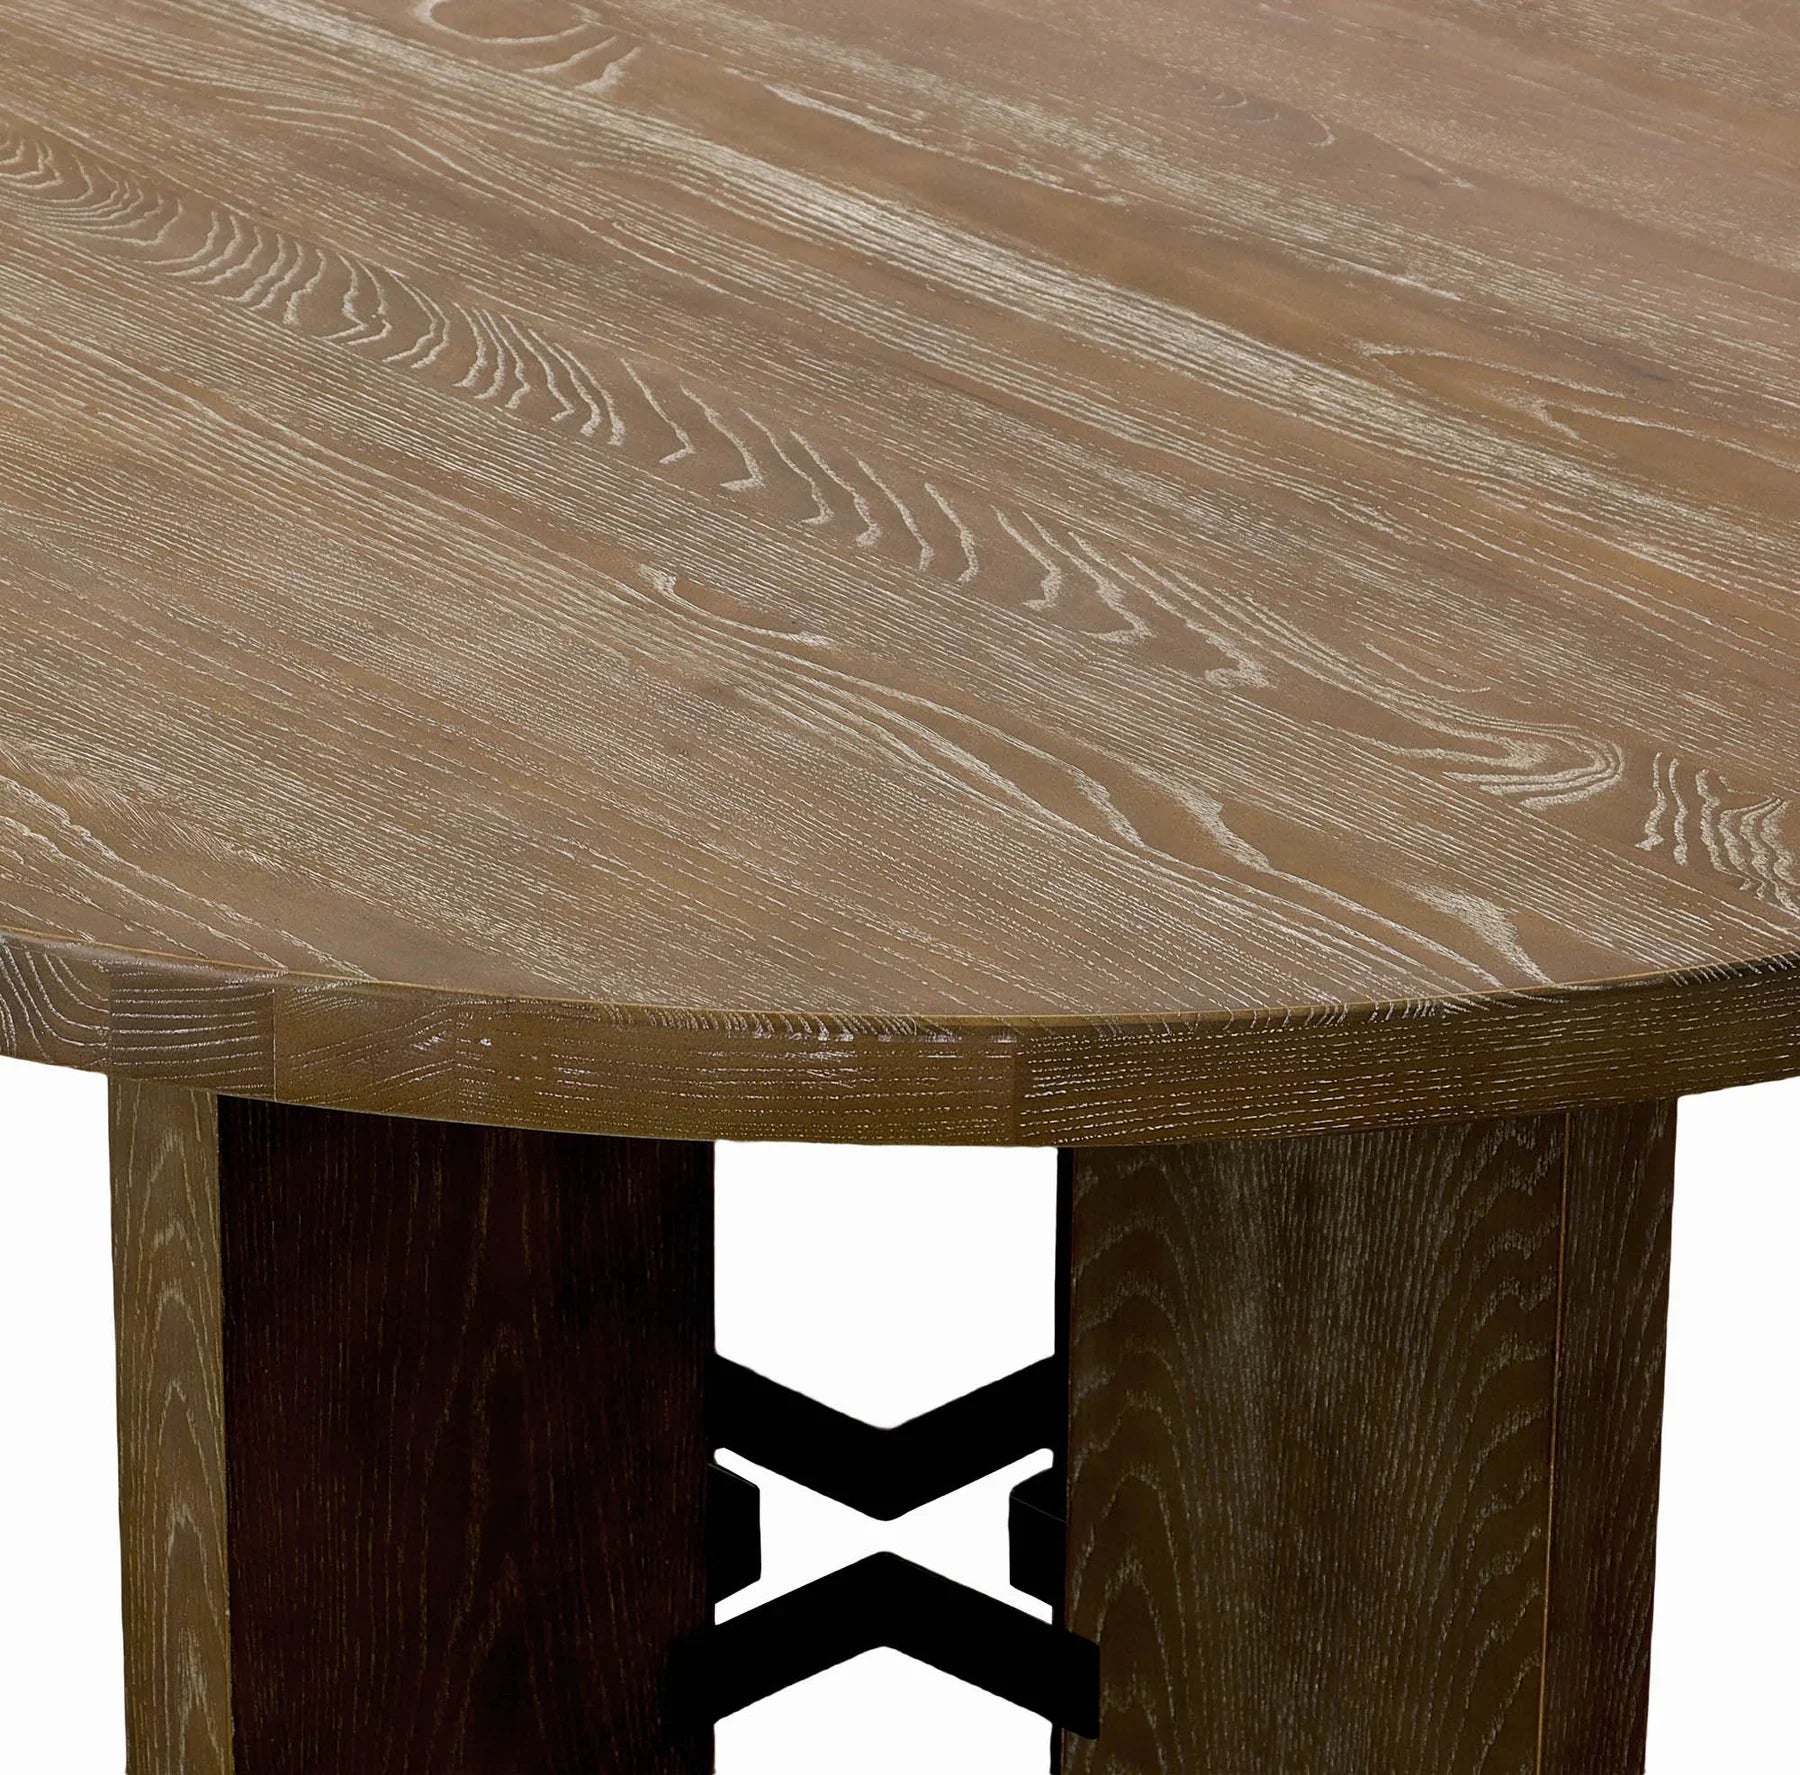 Fraser 52" Round Dining Table - Light Brown